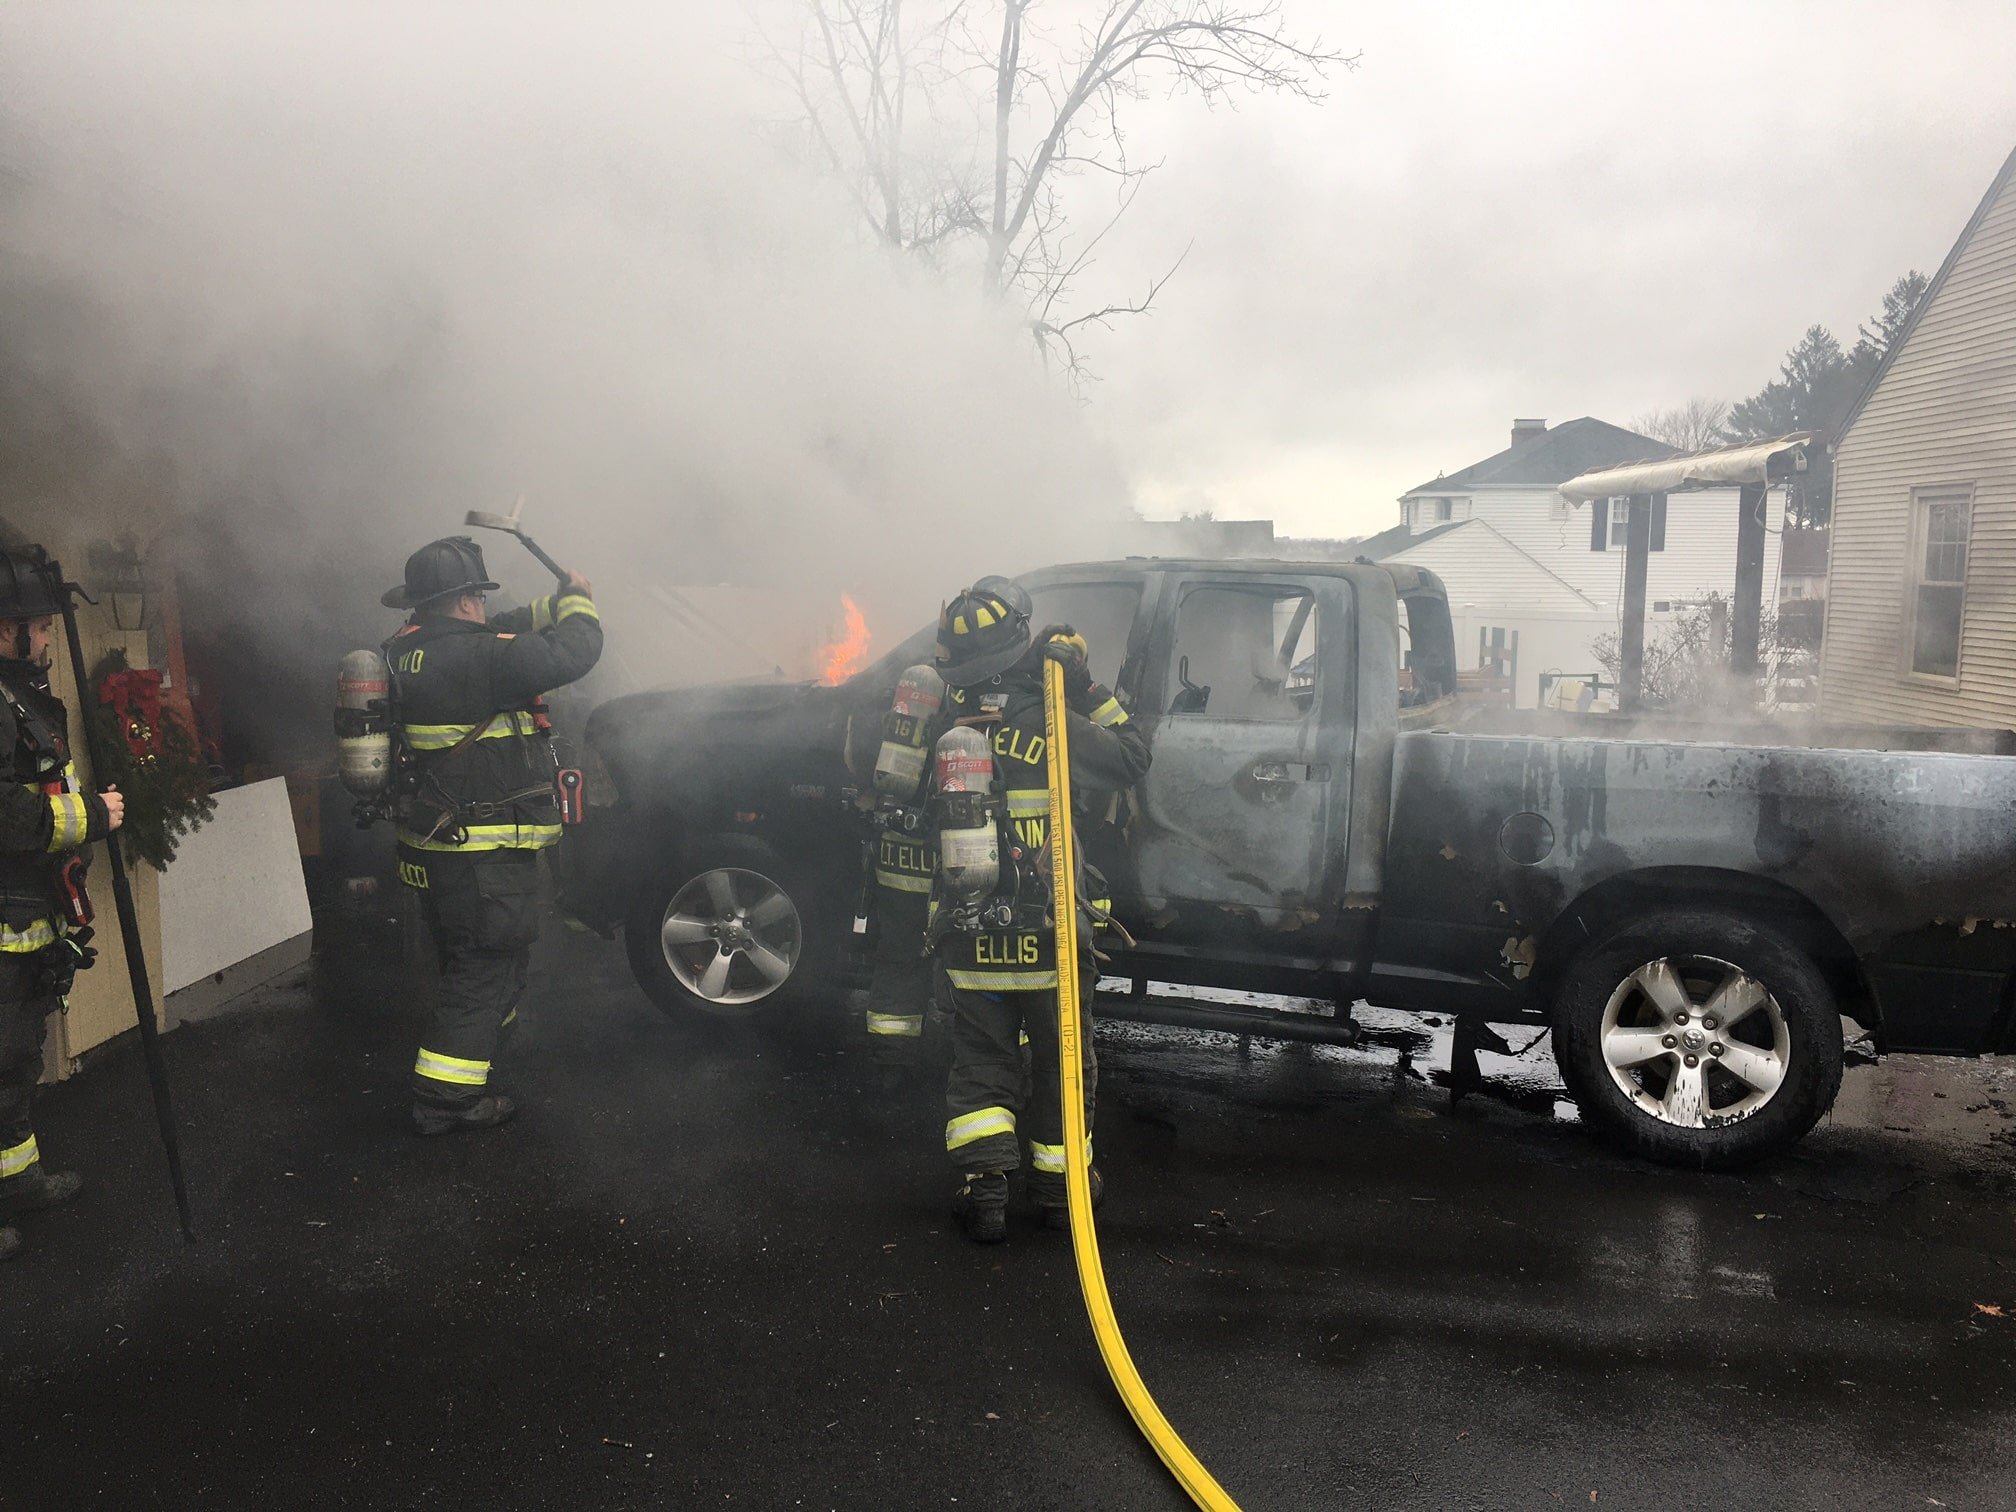 Deputy Chief William Higgins reports that Enfield Fire District No. 1 extinguished a pickup truck fire earlier today. (Photo courtesy Enfield Fire District)